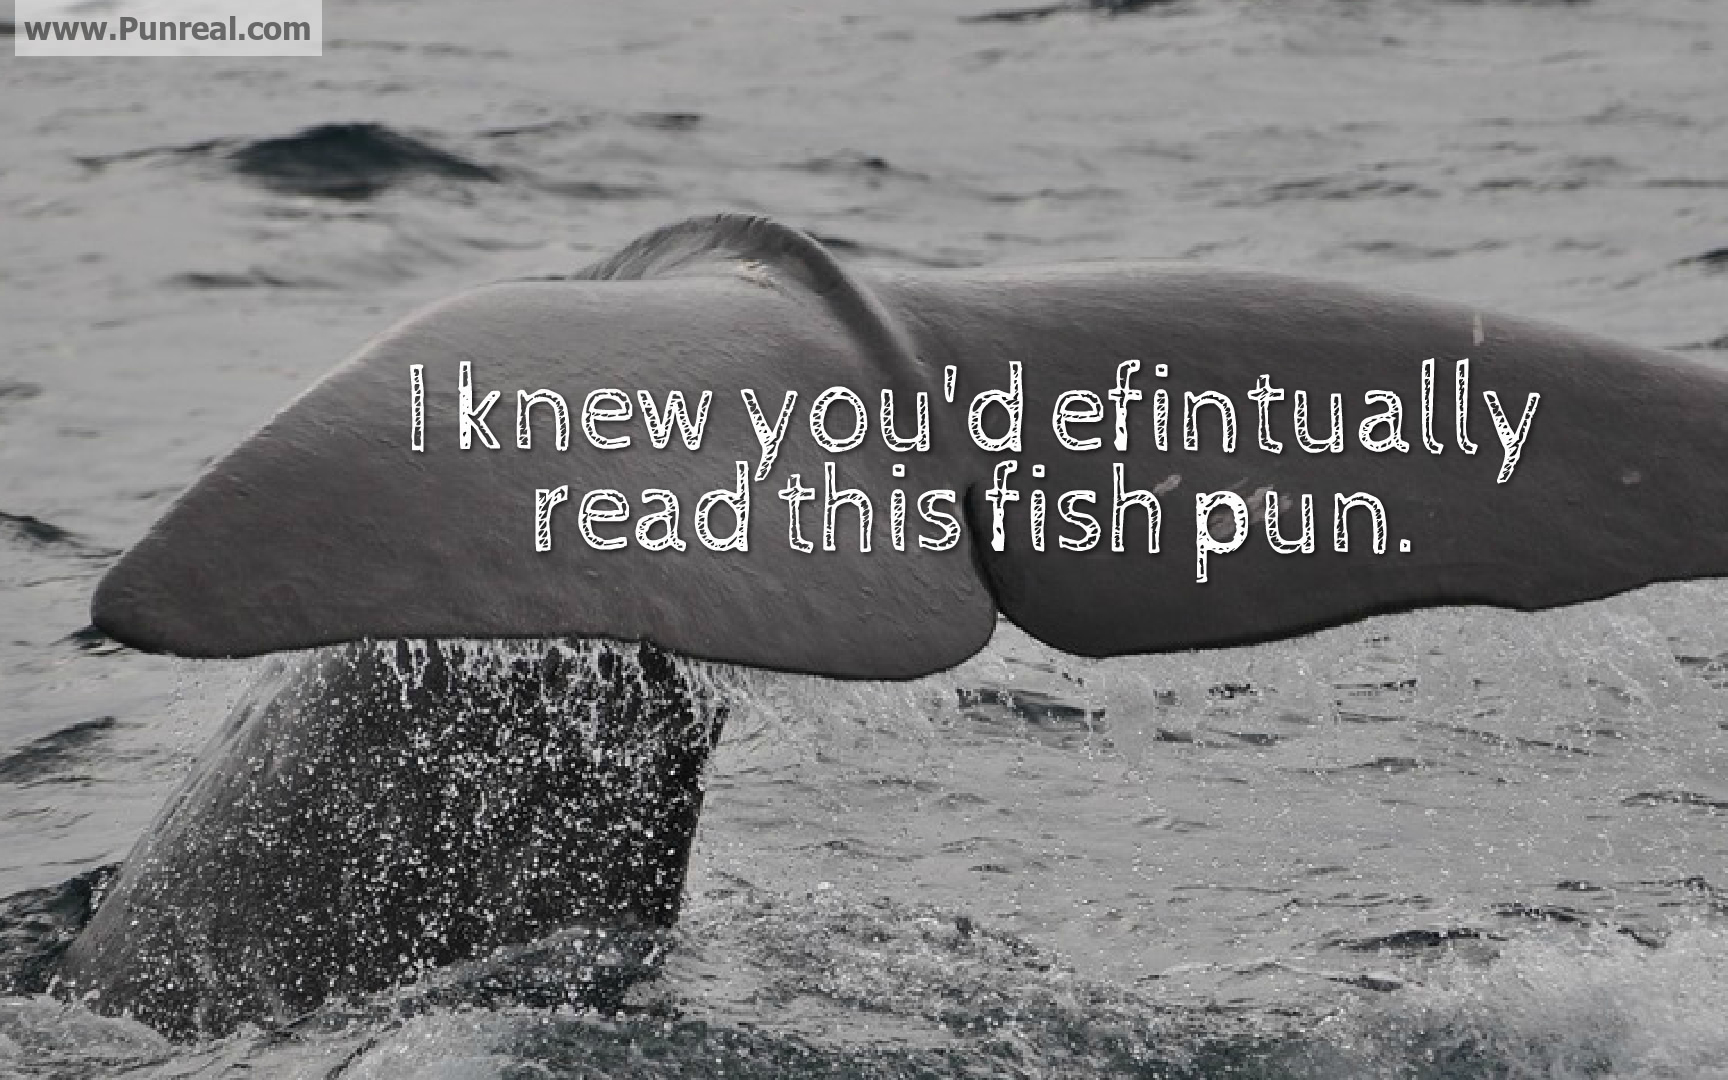 I knew you'd efintually read this fish pun.